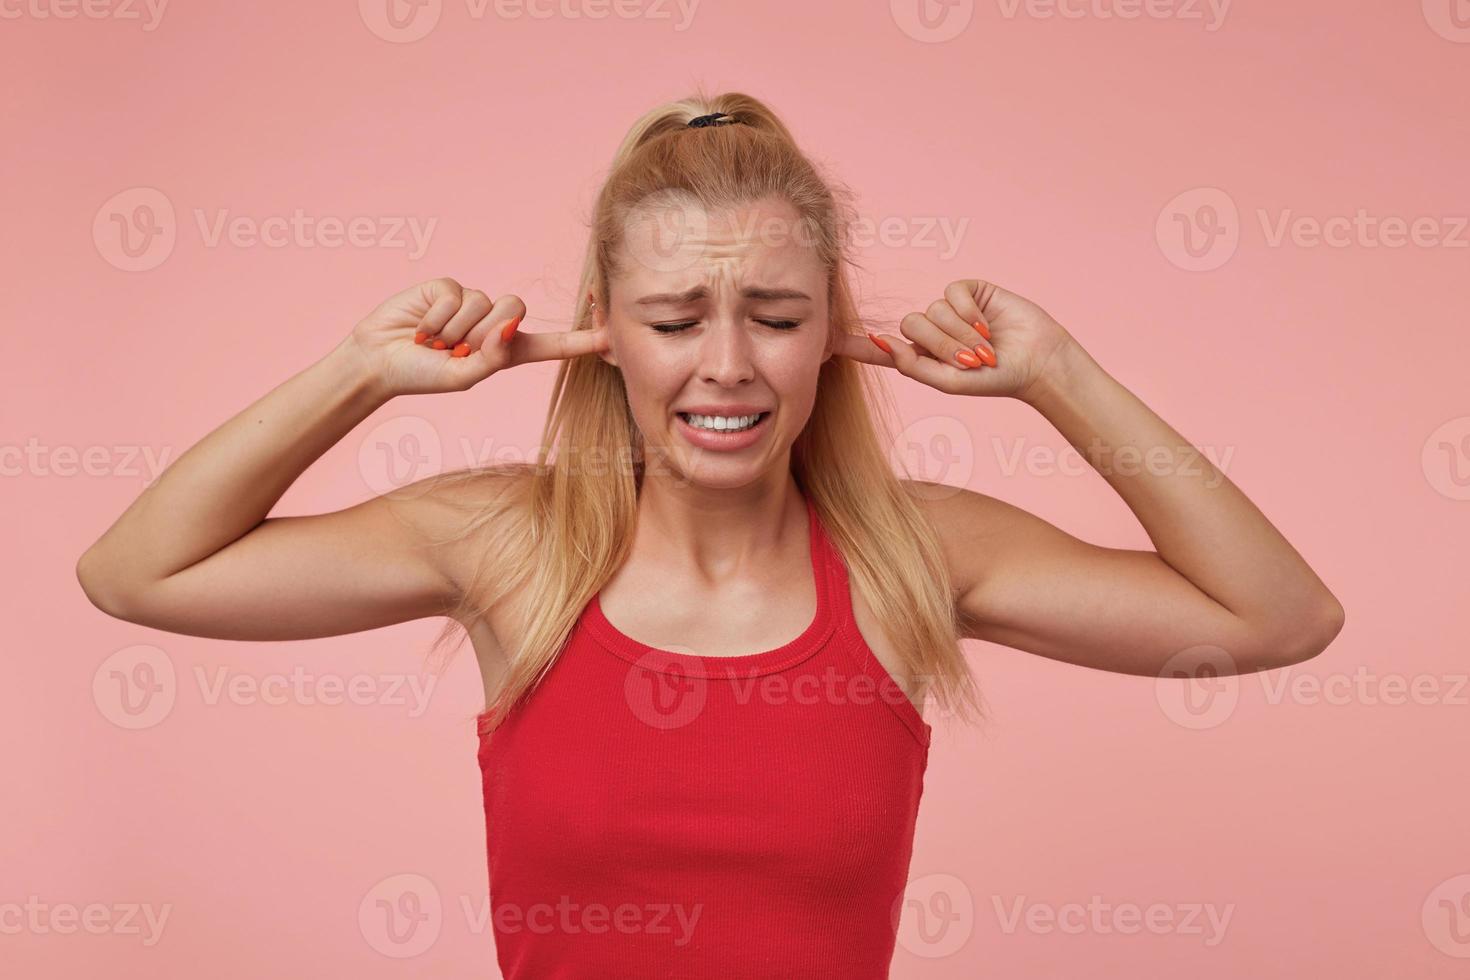 Studio photo of good looking young woman with casual hairstyle standing over pink background, covering ears with hands and wrinkling, trying to avoid loud sounds